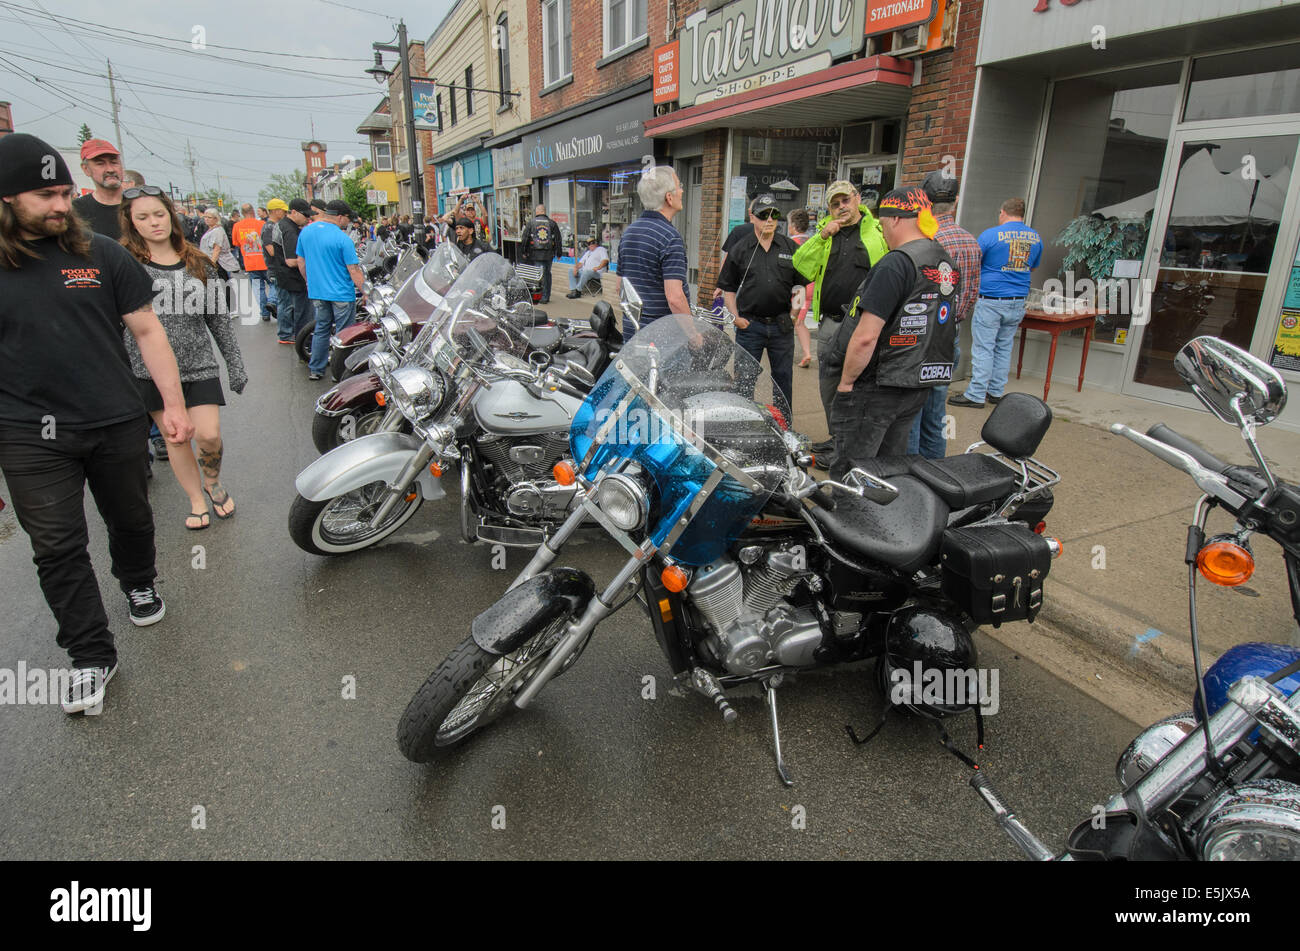 Motorcylce culture is 'king' on Main Street, in the town of Port Dover, Ontario, Canada, during the 'Friday the Thirteenth' motorcycle rally. Stock Photo